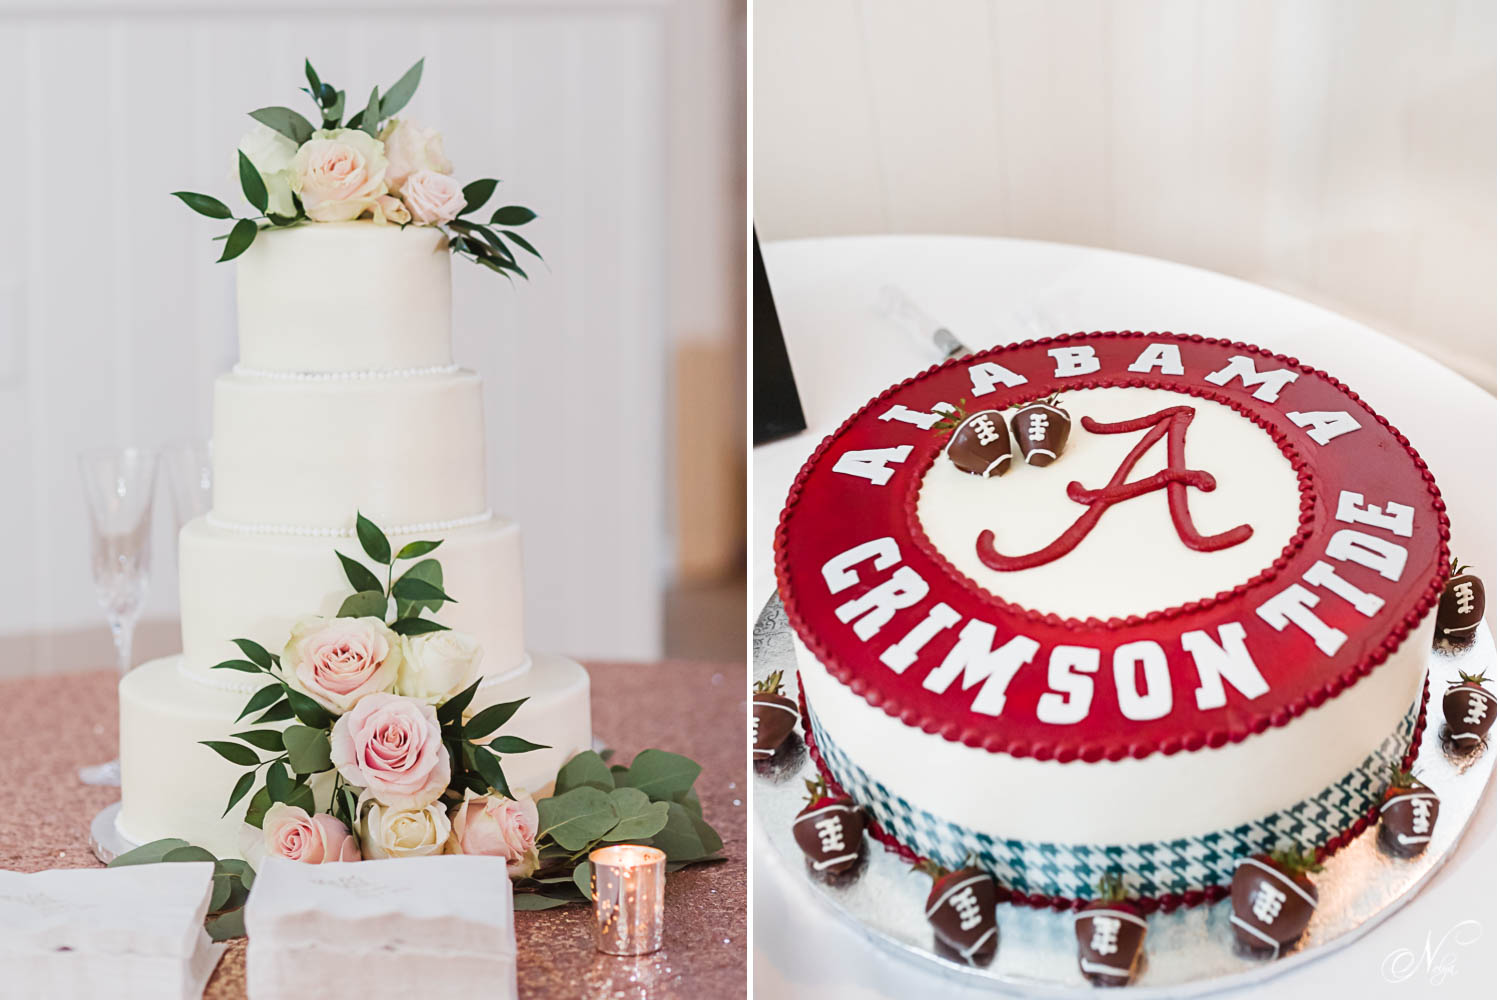 Gorgeous white five tiered wedding cake with pinkroses. And An Alabama Crimson Tide groom's cake with chocolate covered Strawberries made by Kimmies Cakes 